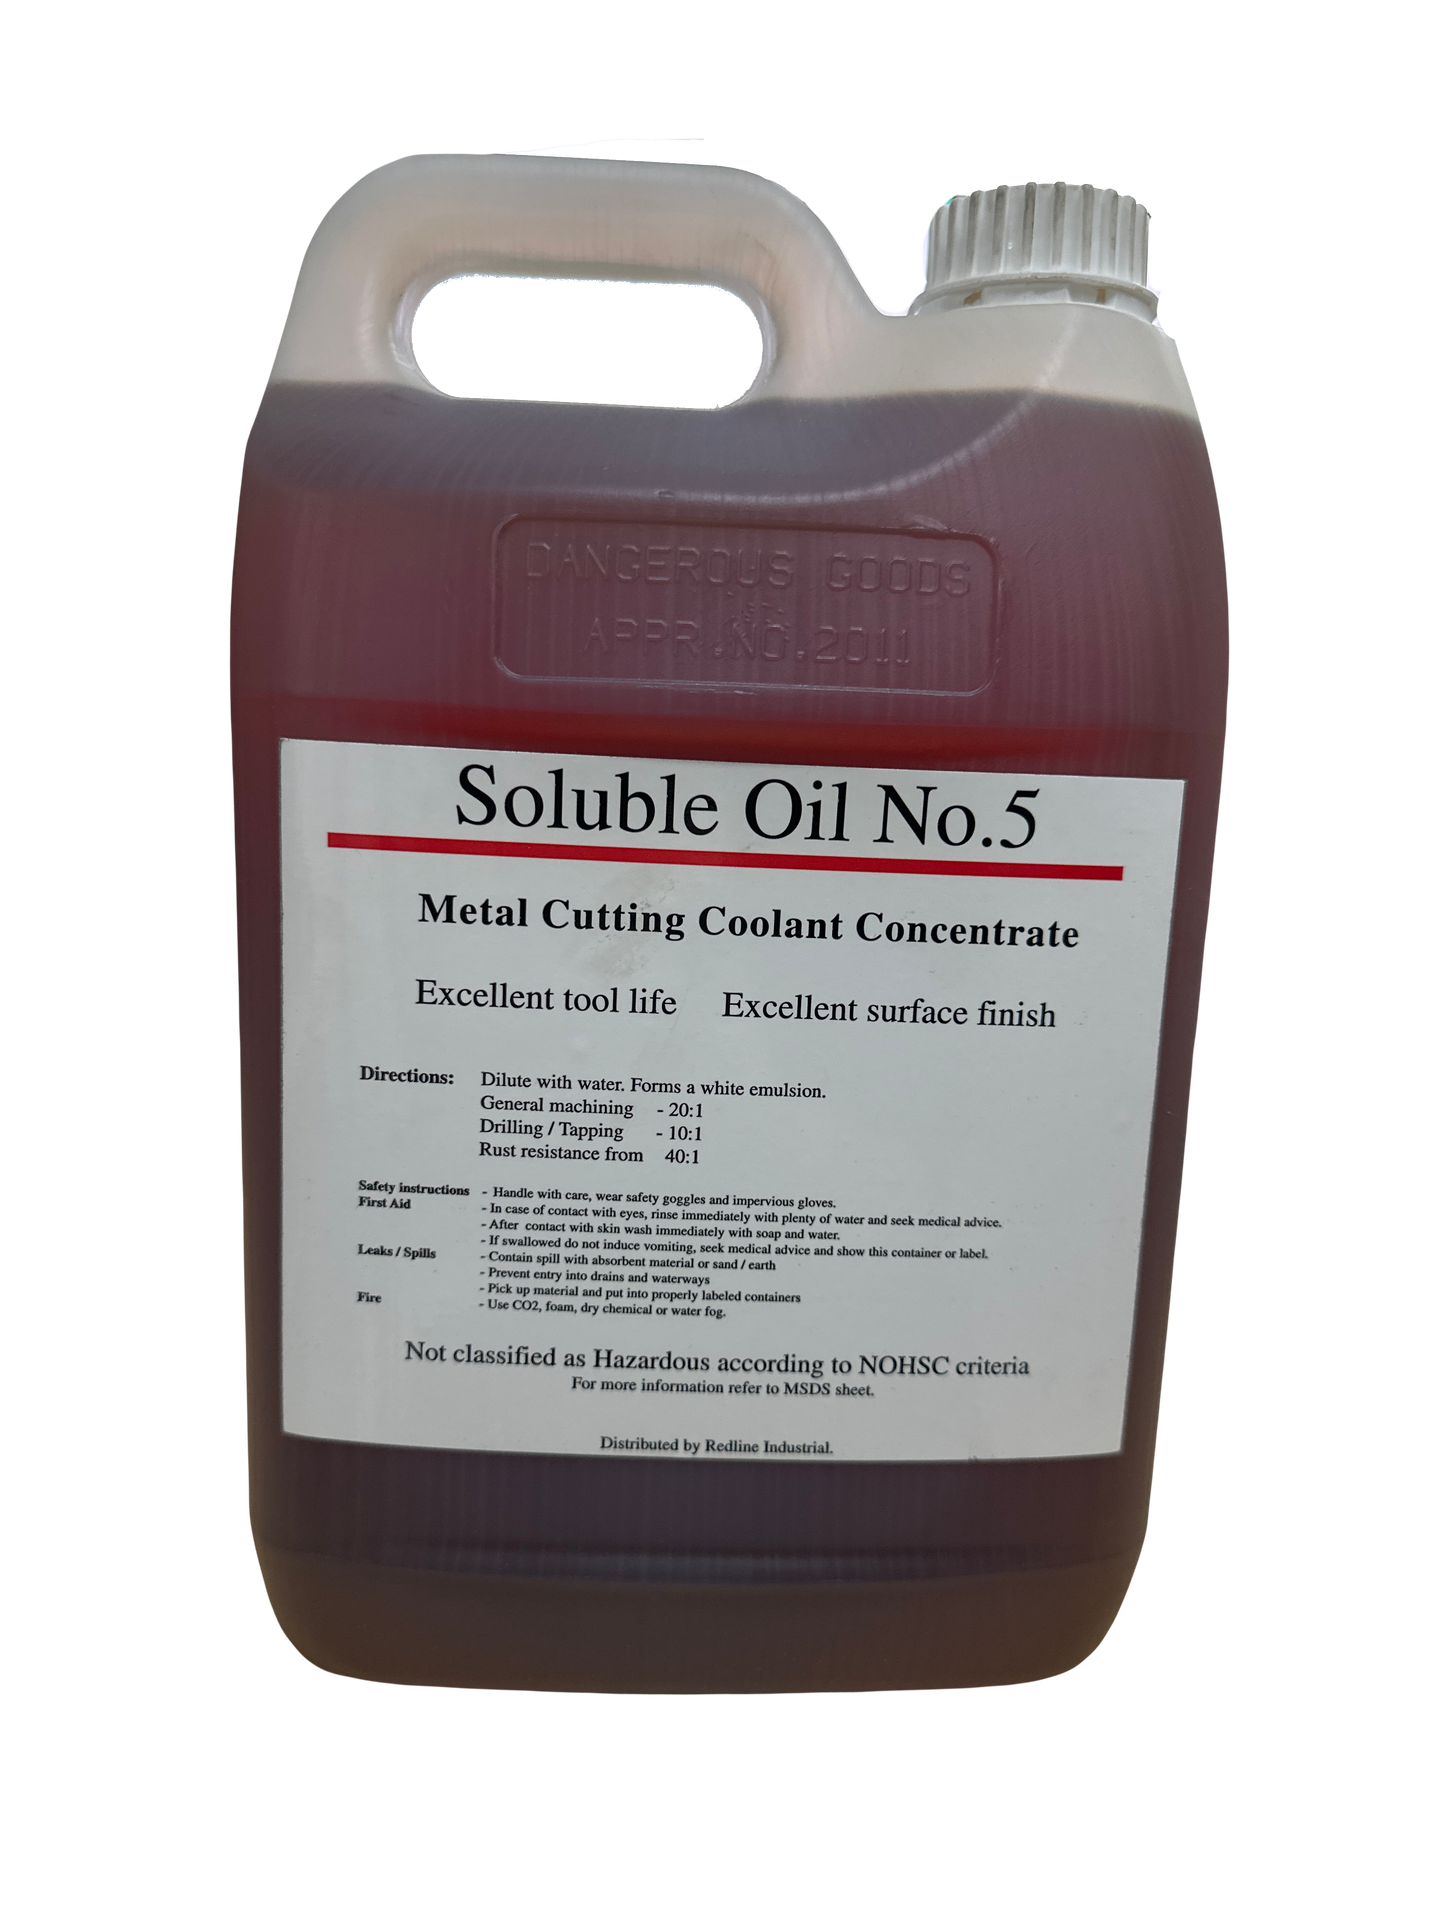 Soluble Oil No.5 Metal Cutting Coolant Concentrate